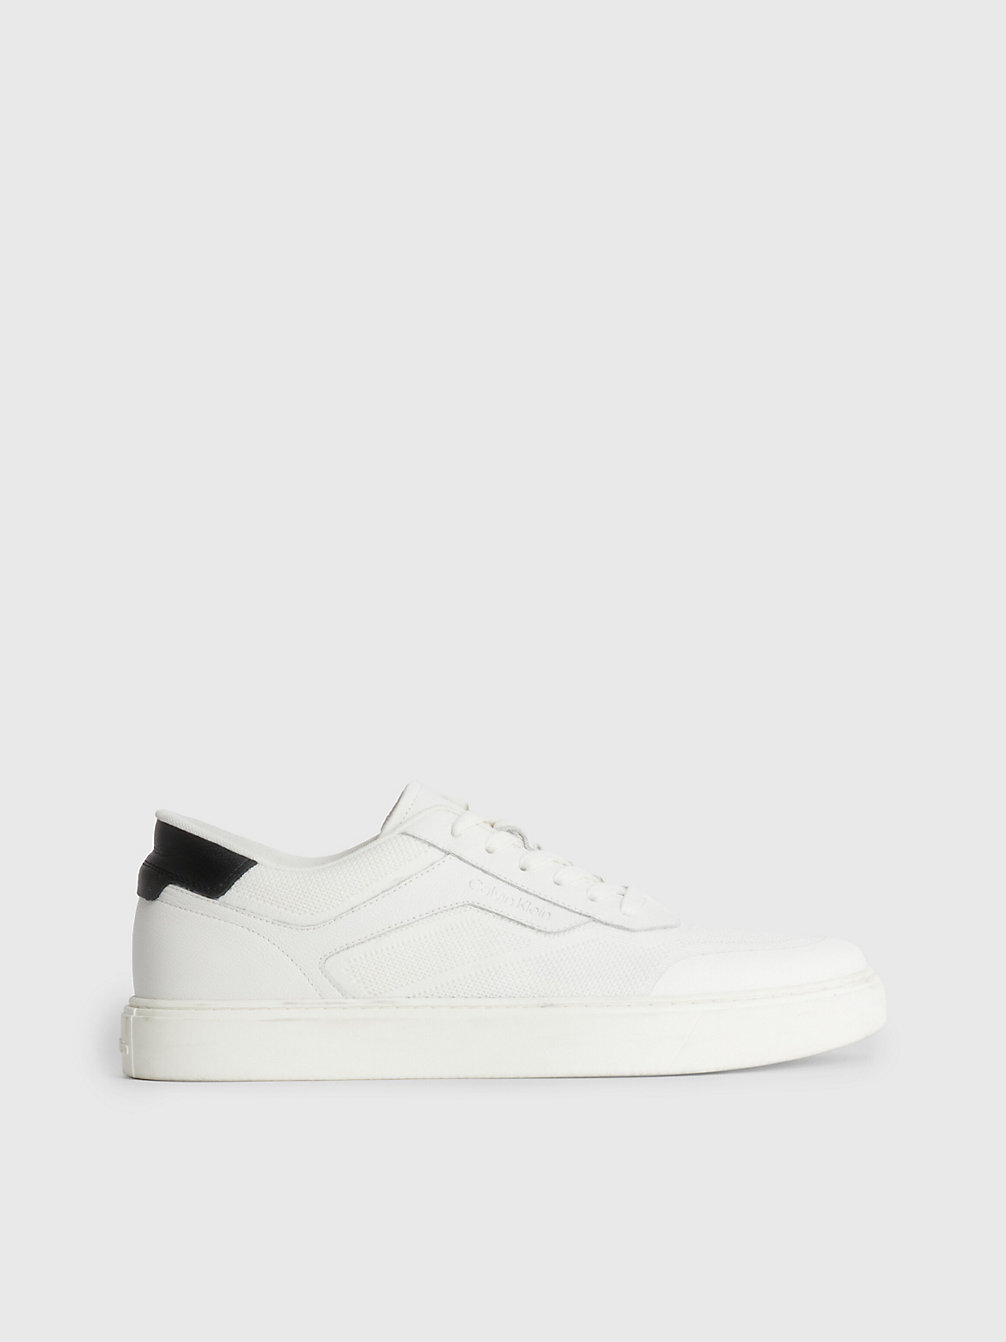 WHITE/BLACK Leather And Knit Trainers undefined men Calvin Klein